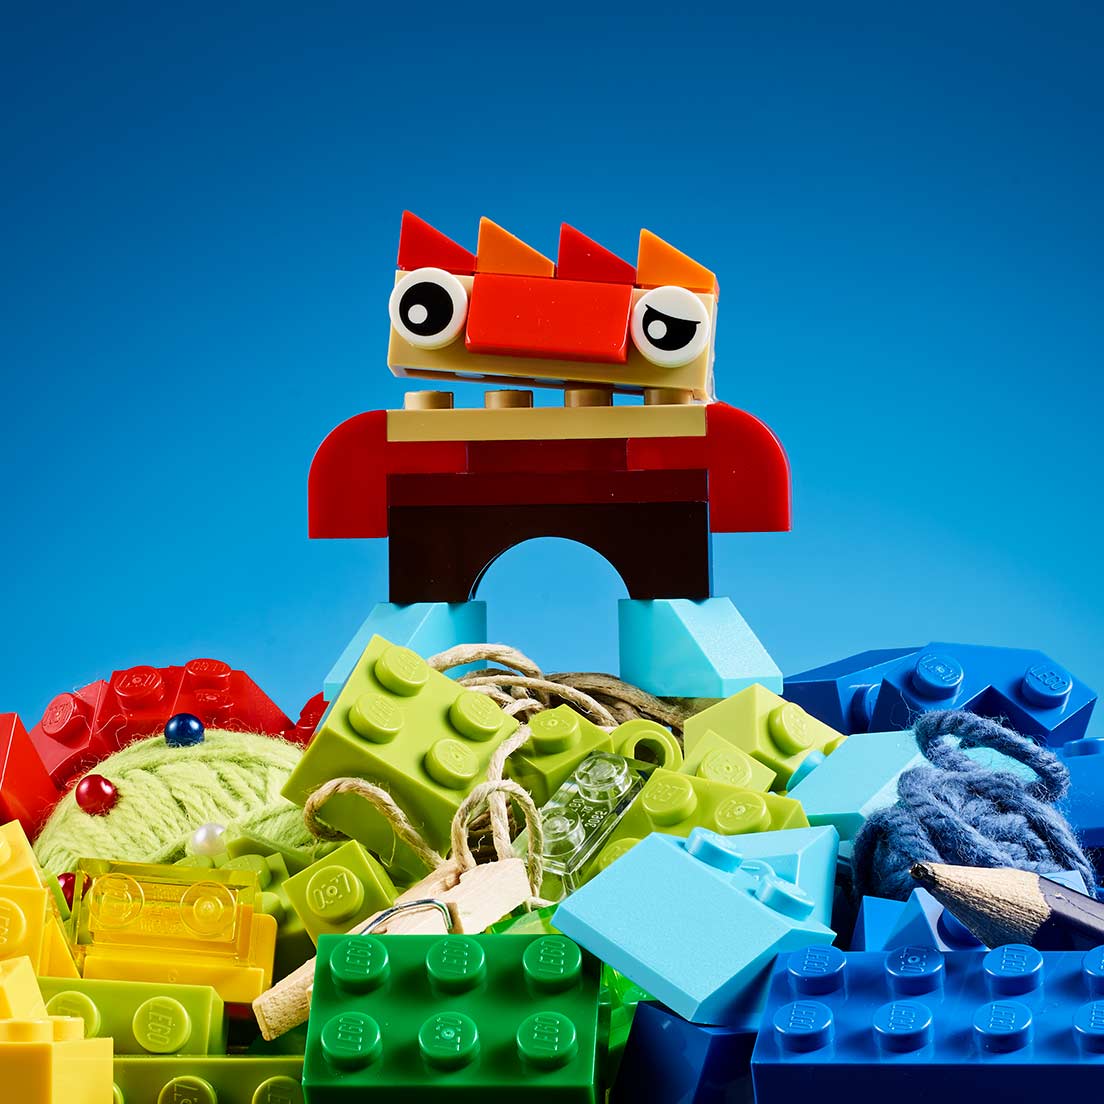 Lego implements new supply chain software - Logistics Manager